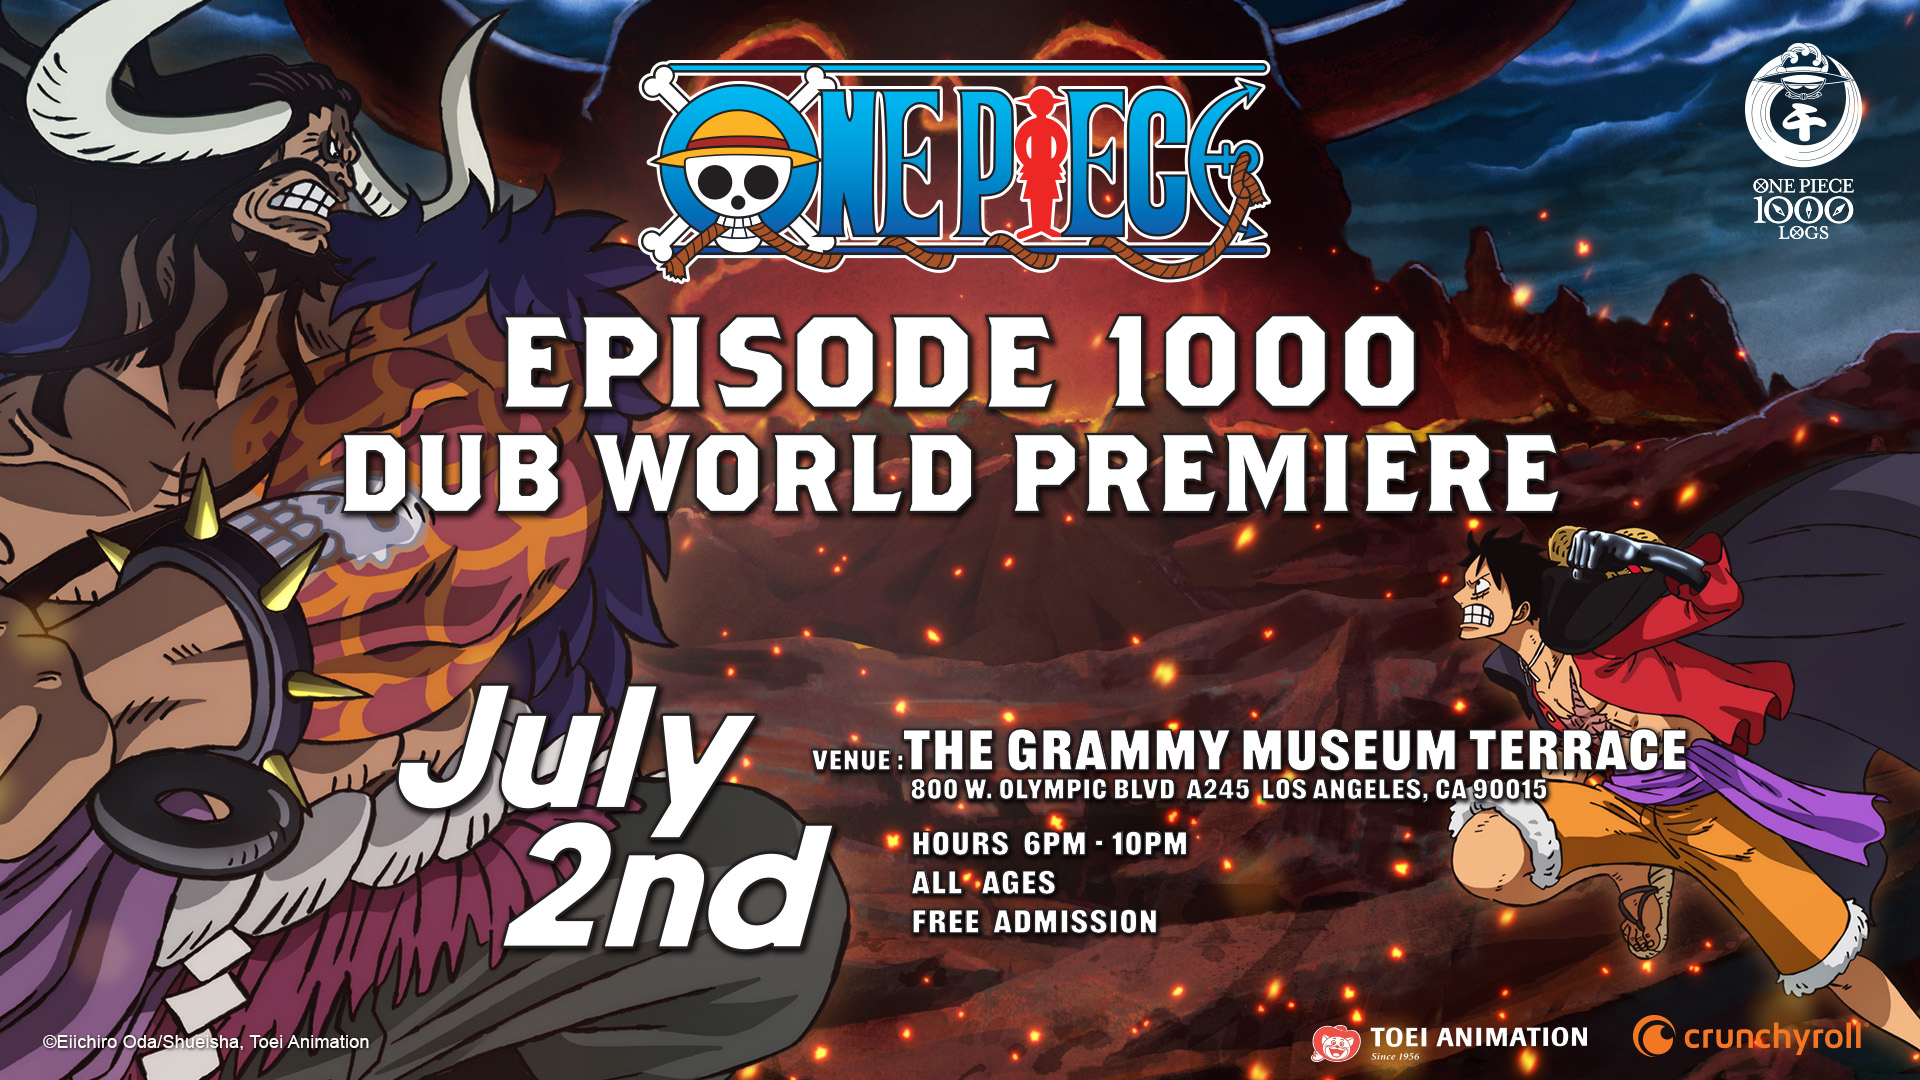 Toei Animation and Crunchyroll will be co-hosting the special event “One  Piece Episode 1000 Dub World Premiere” at AX 2023! - Anime Expo